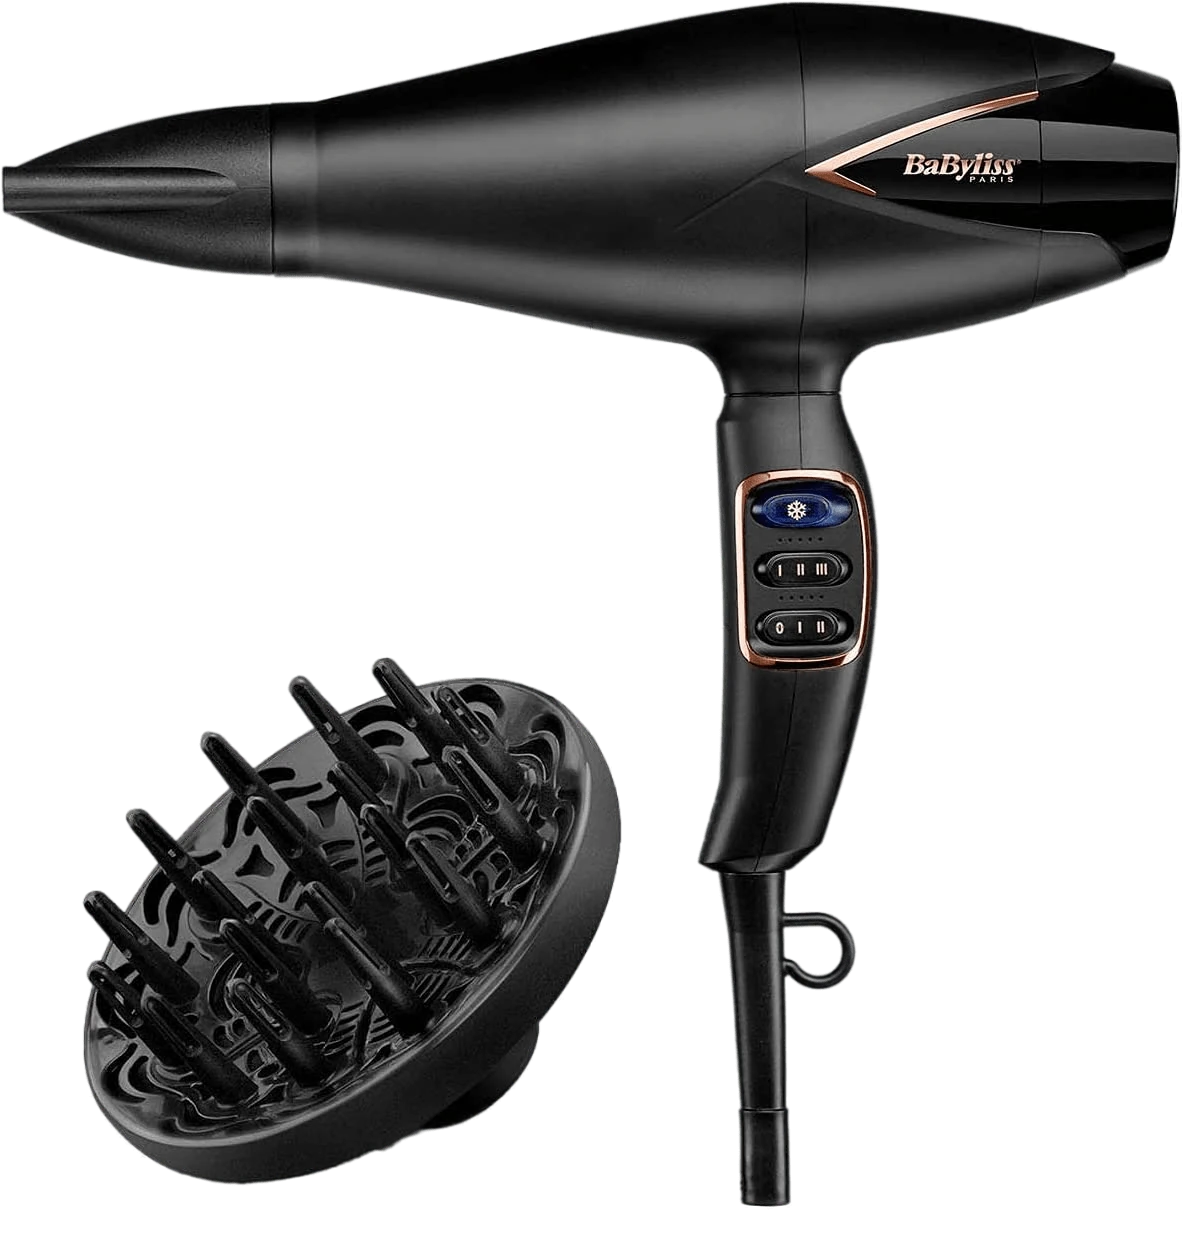 Babyliss D665Sde Professional 2200W Titanium Ceramic Hair Dryer With Cool Shot Button, Diffuser, Slim Concentrator, Super Ionic Conditioning & 2 Speed 3 Heat Settings